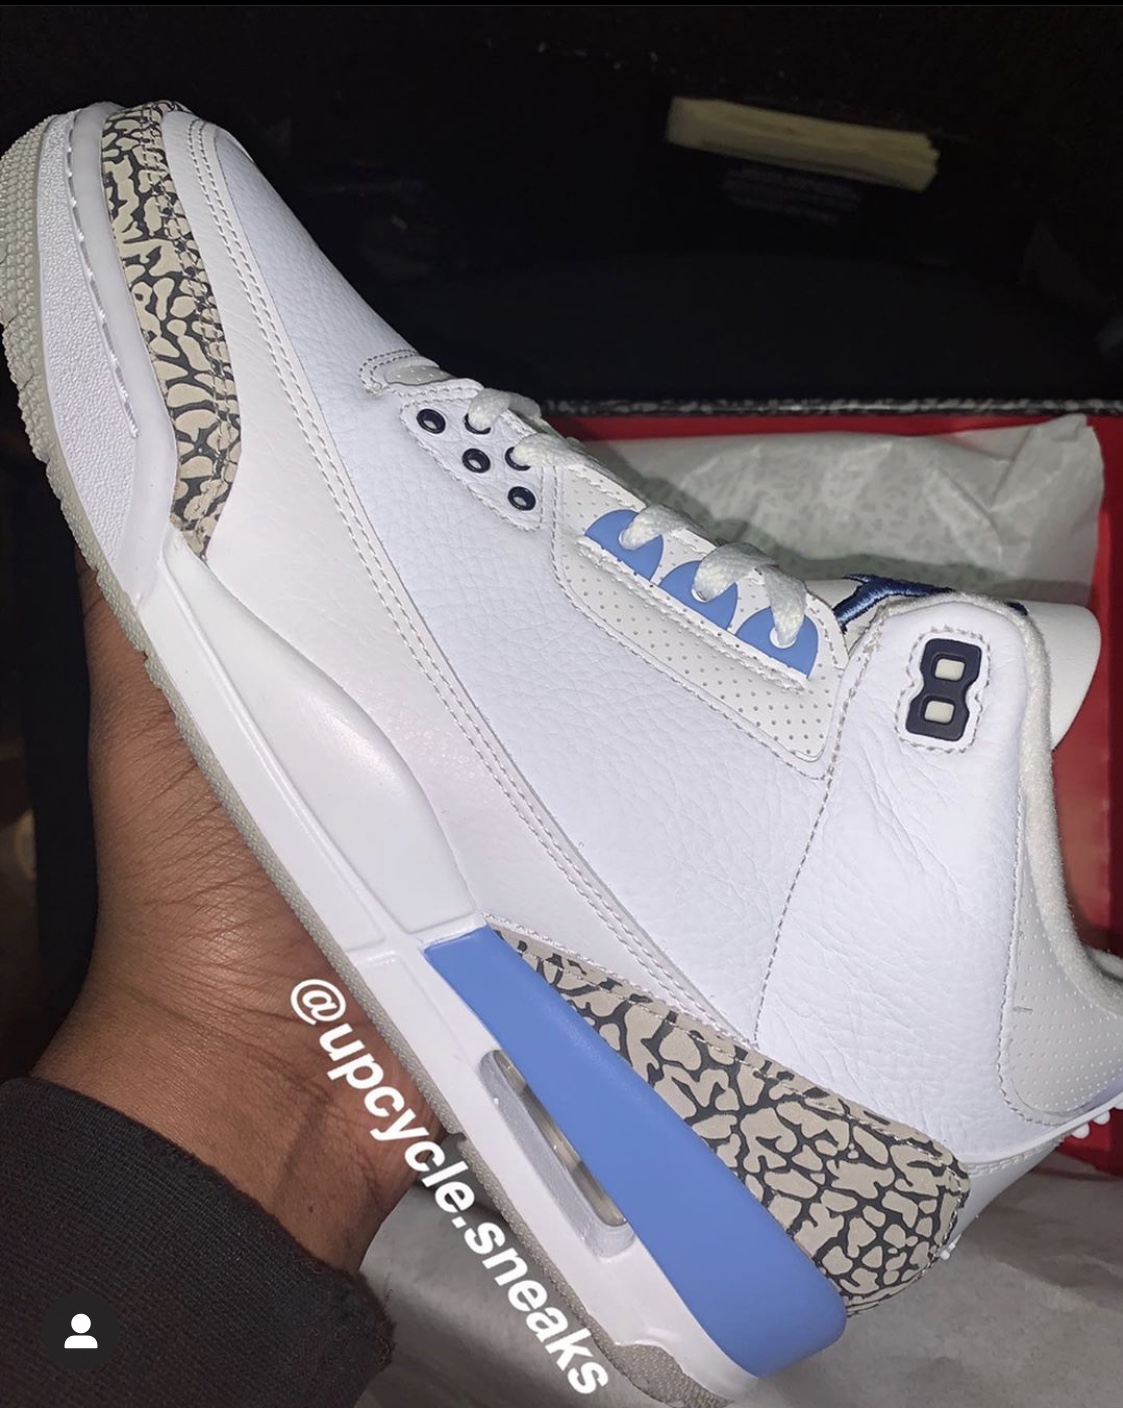 Check out these images of the “UNC” Air Jordan 3 | Sneaker Shop Talk